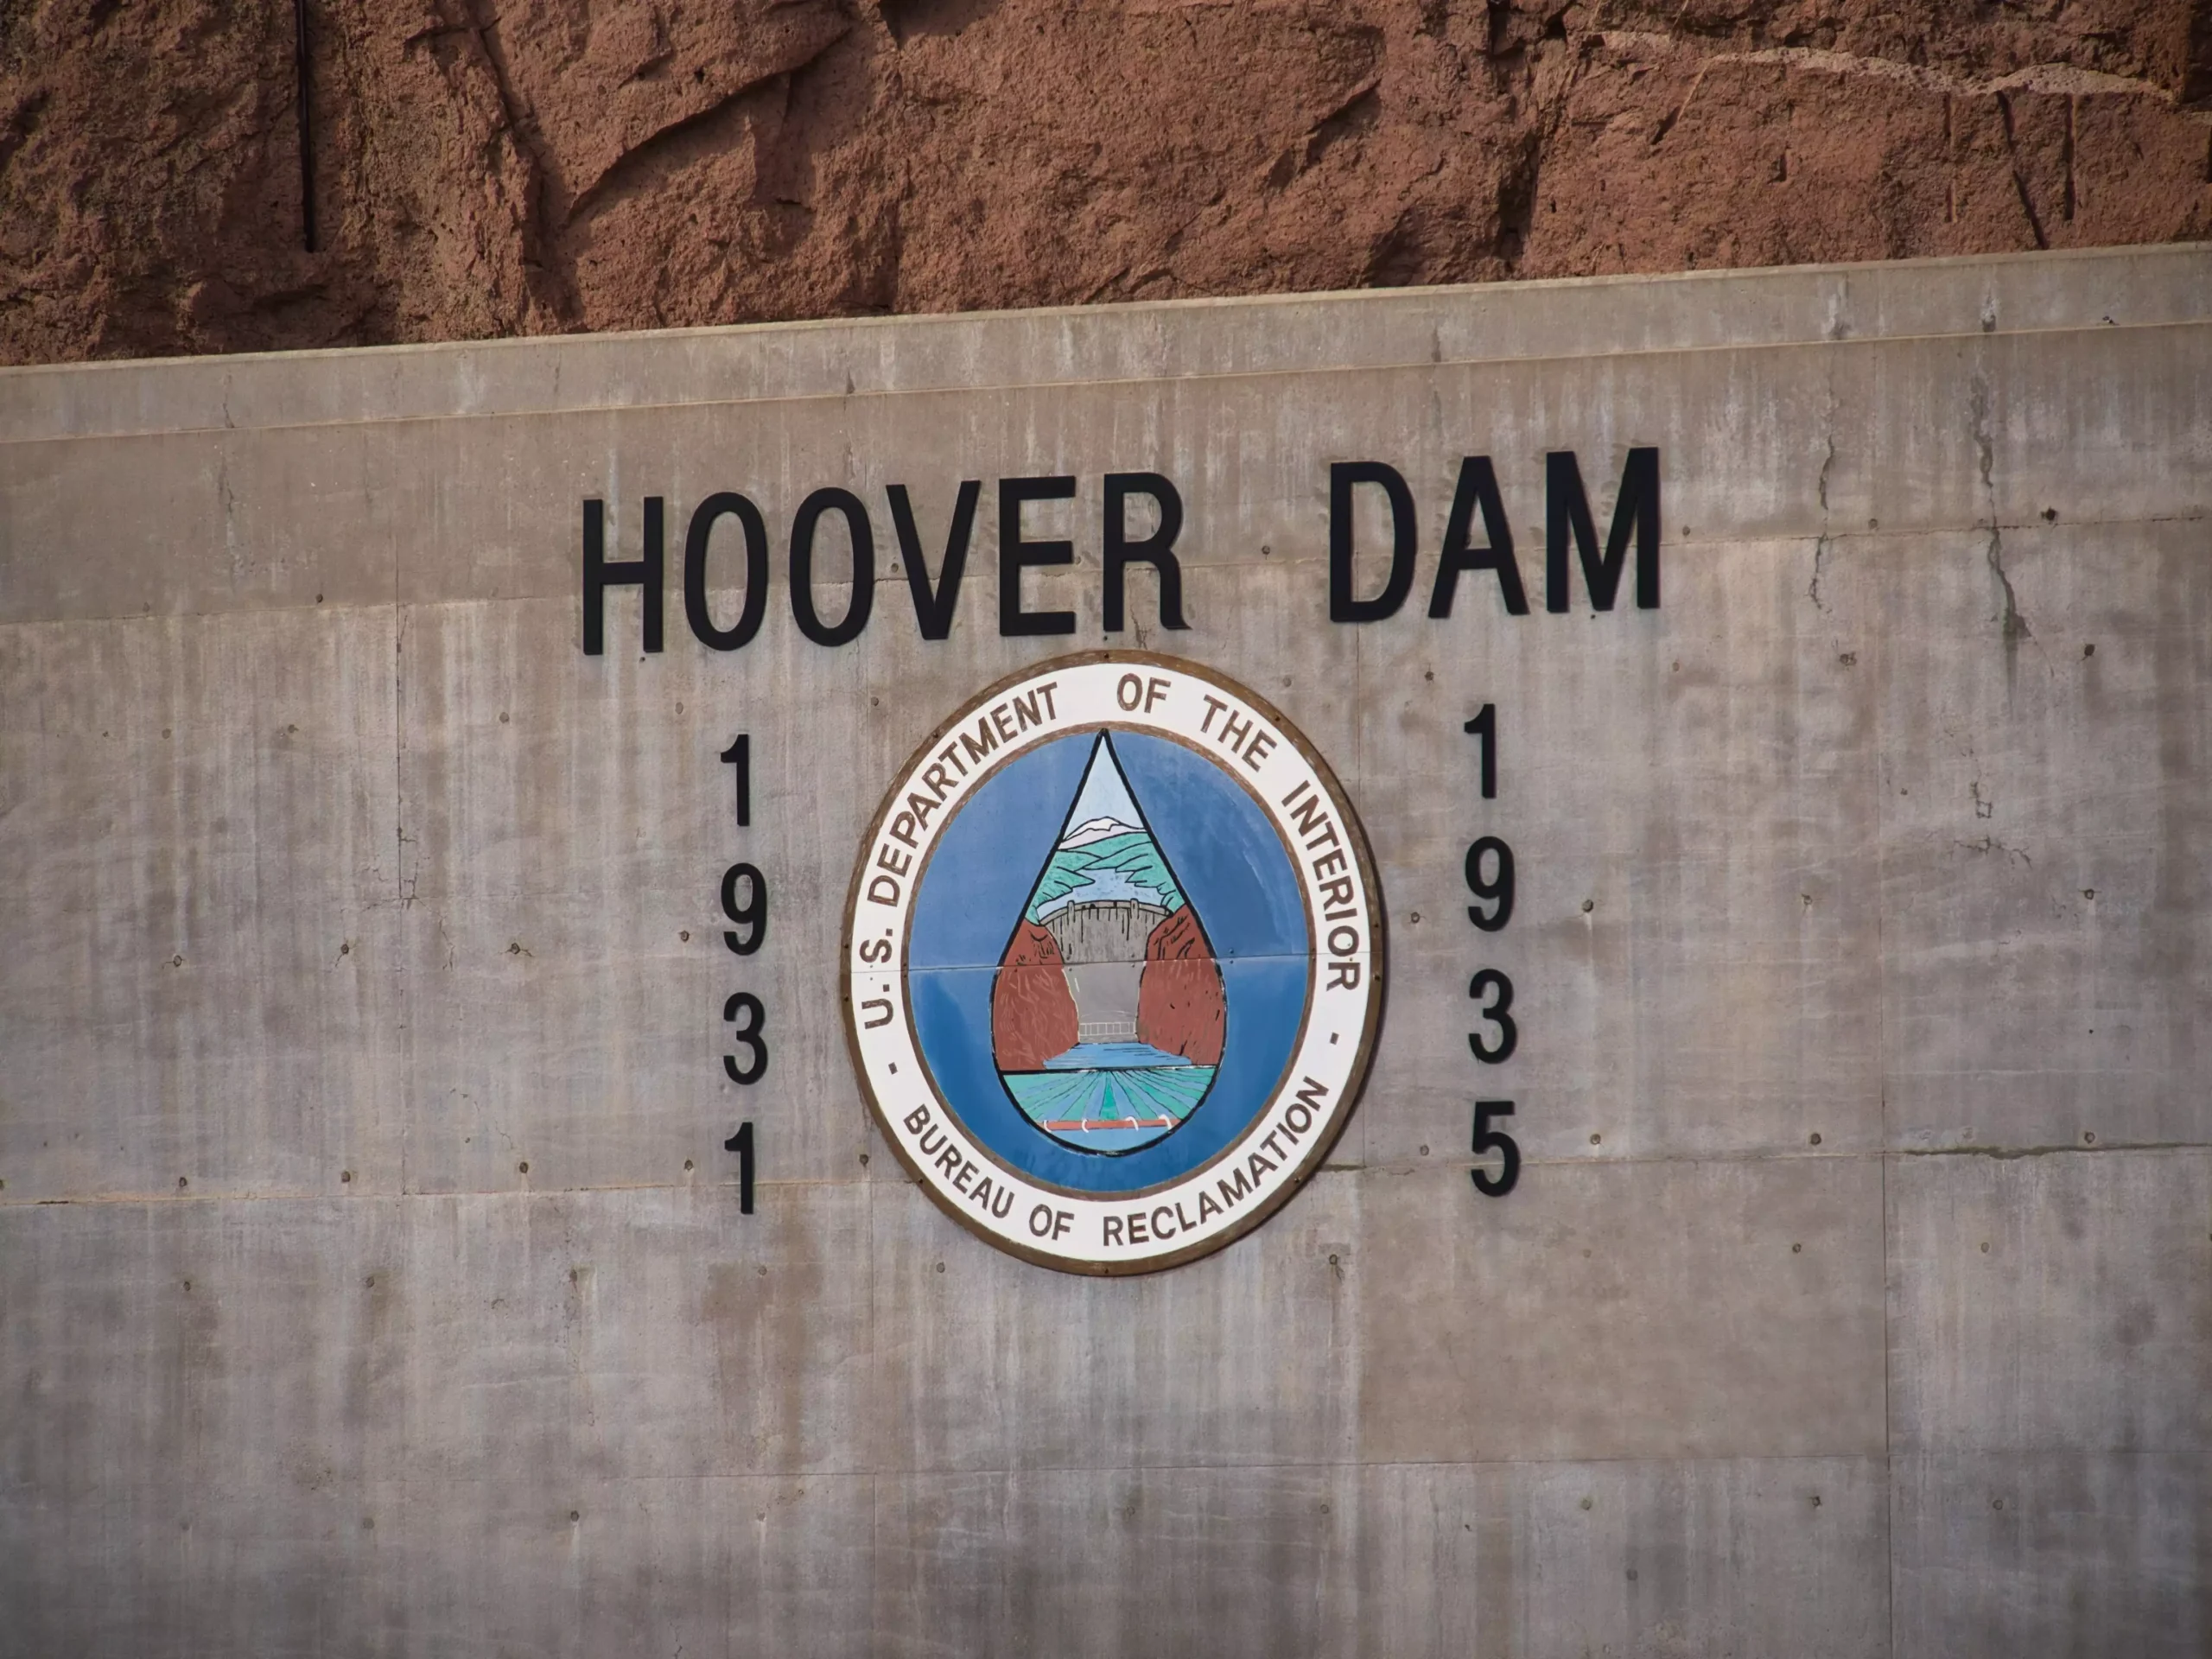 Hoover dam 2 scaled